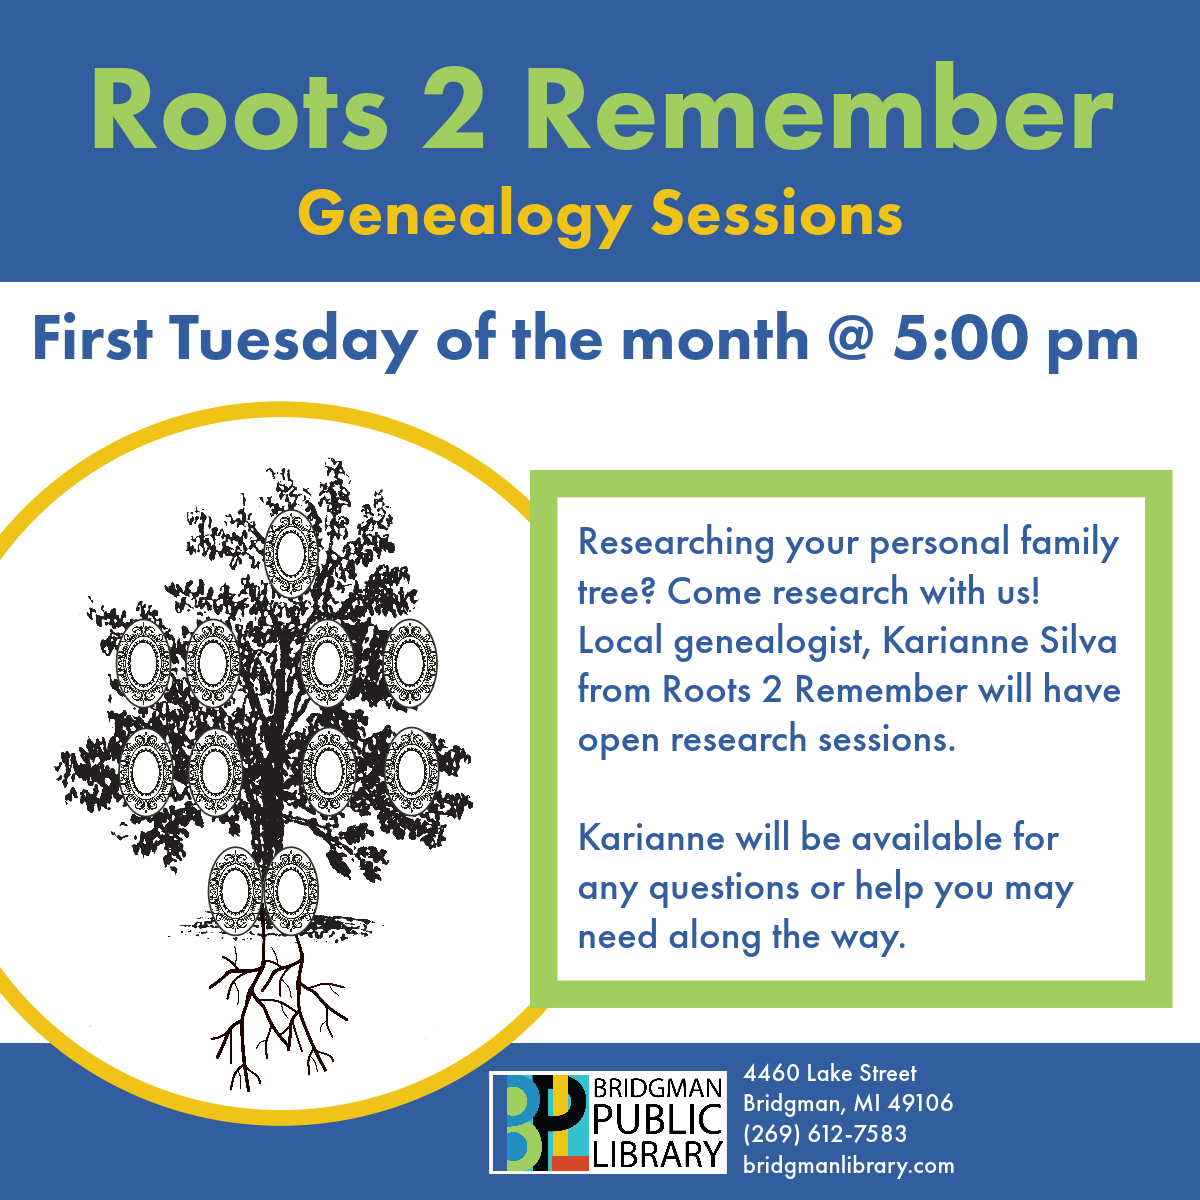 Roots 2 Remember Genealogy Sessions first Tuesdays of the month, 5pm.